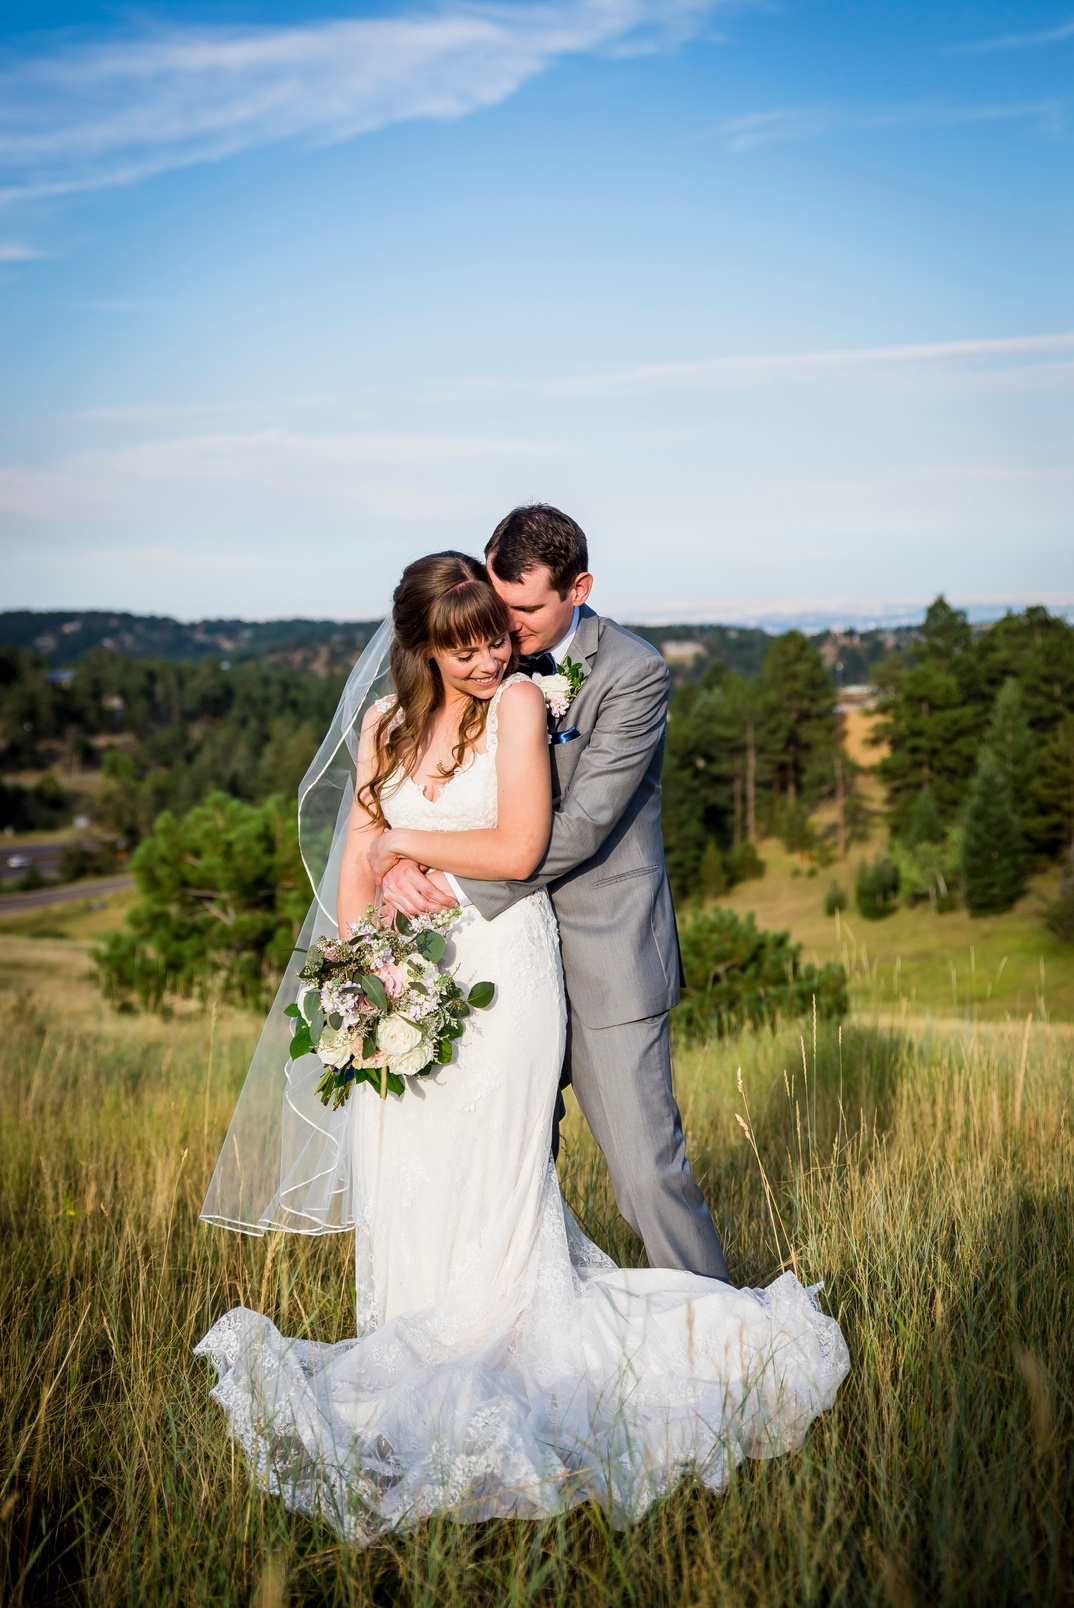 A romantic shot of a groom snuggling his bride from behind at The Pines at Genesee wedding venue in Denver, Colorado.